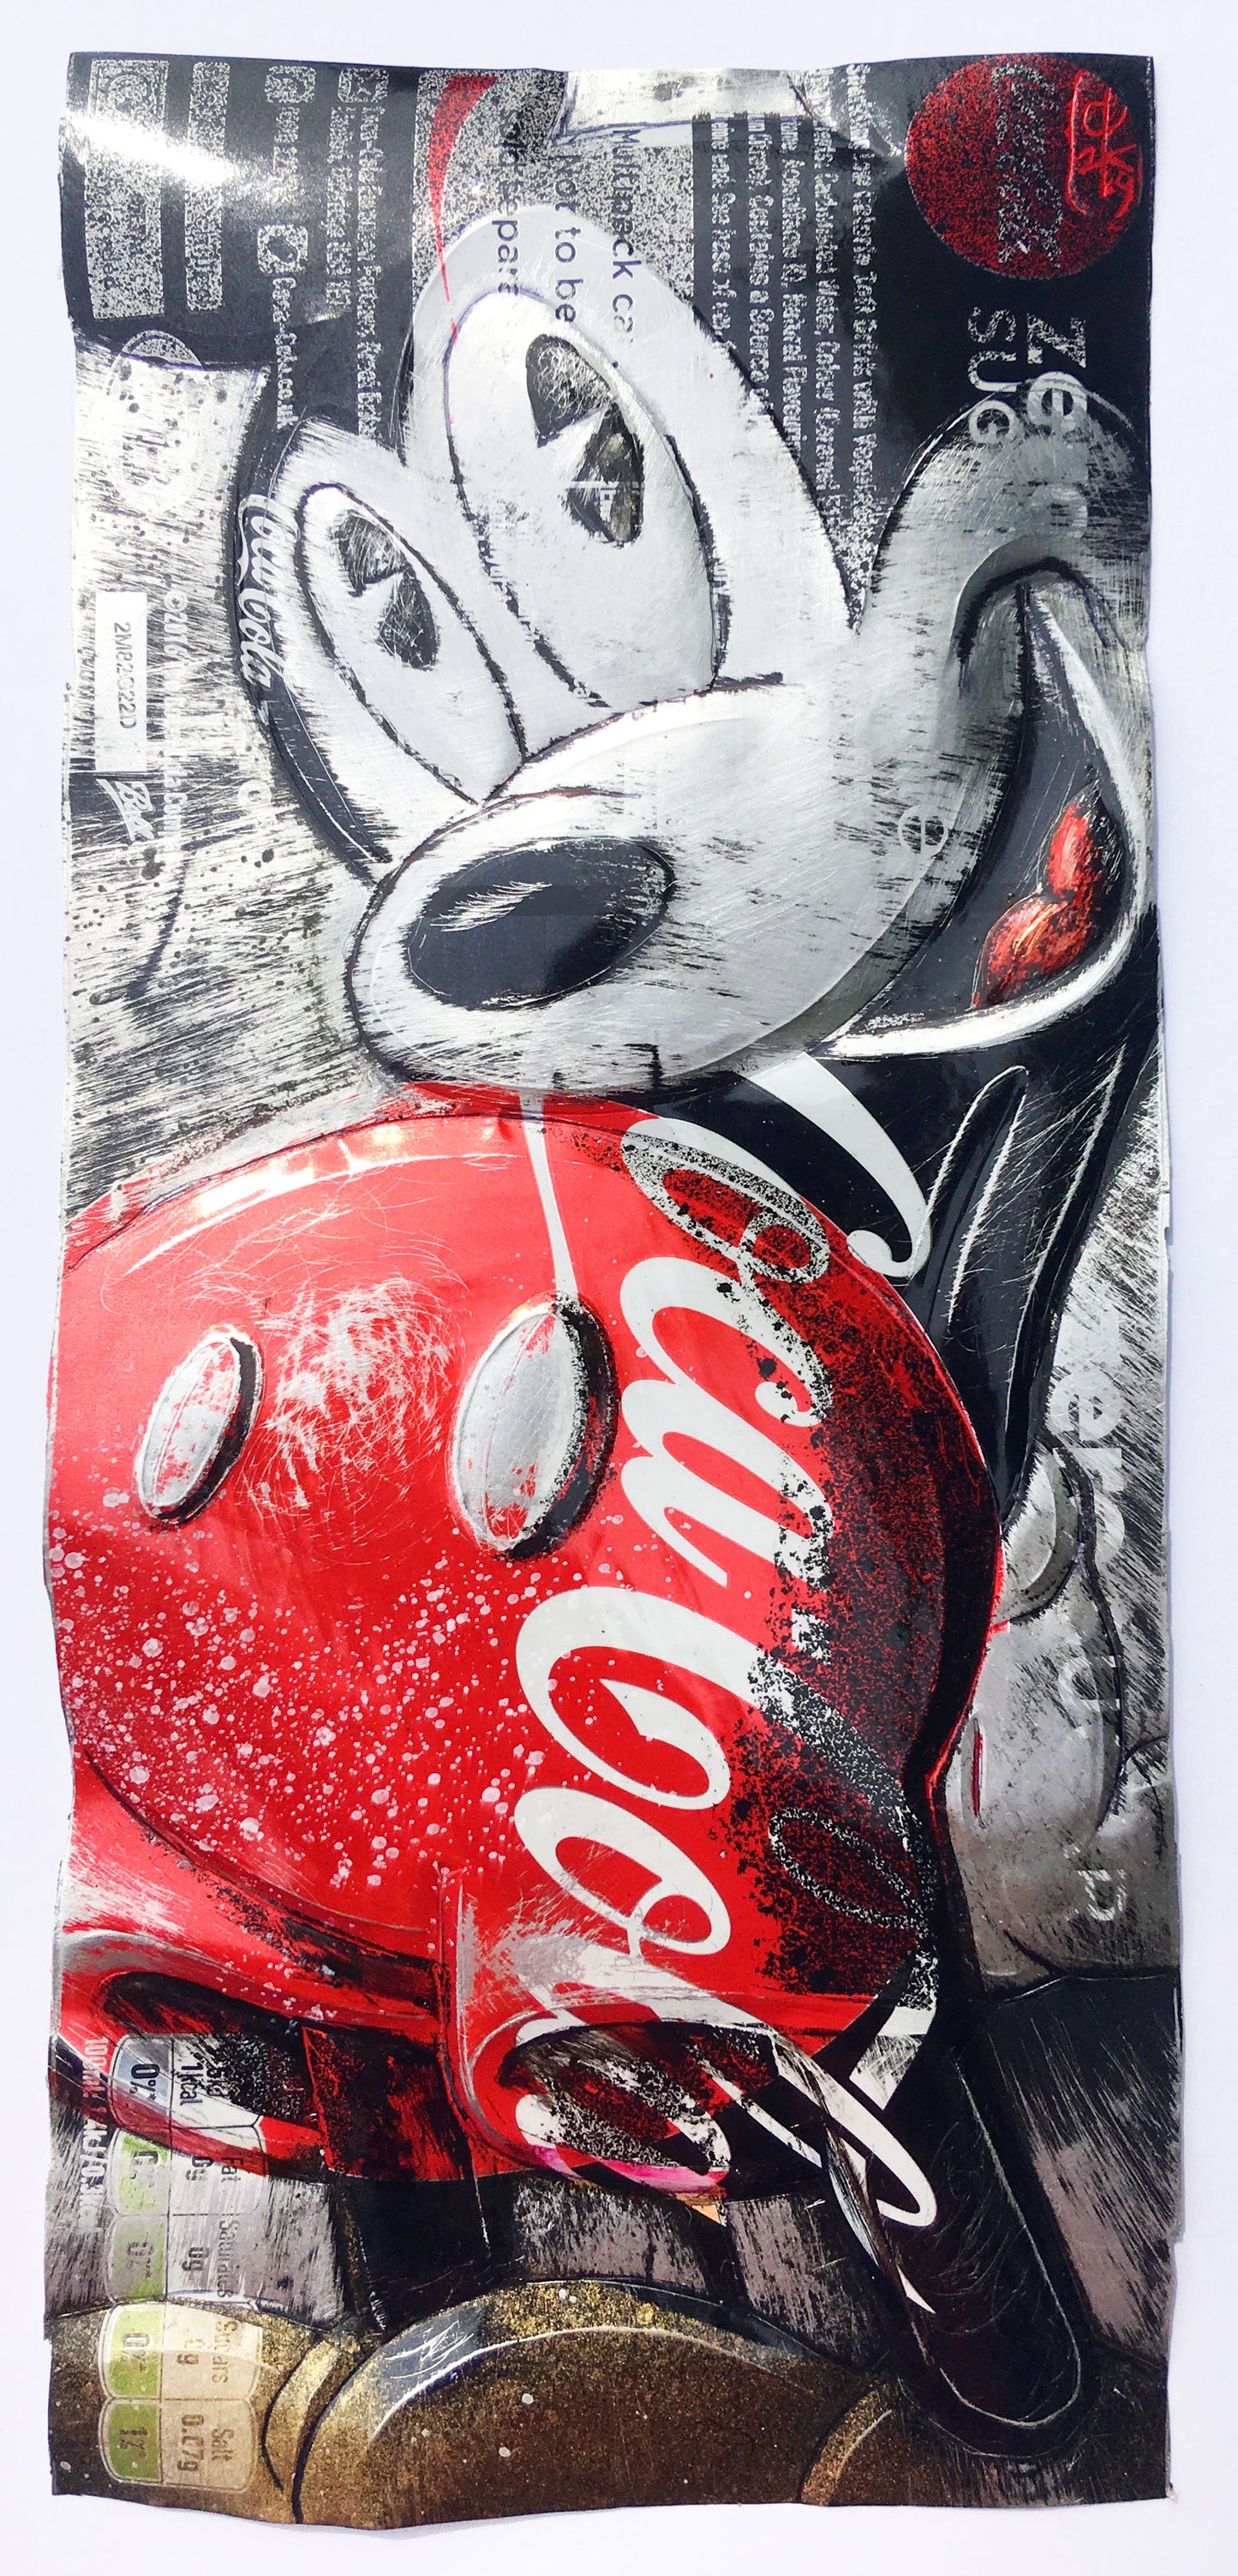 Chris Duncan Signed Original Mixed Media upcycled Zero Sugar Coke can Framed in white